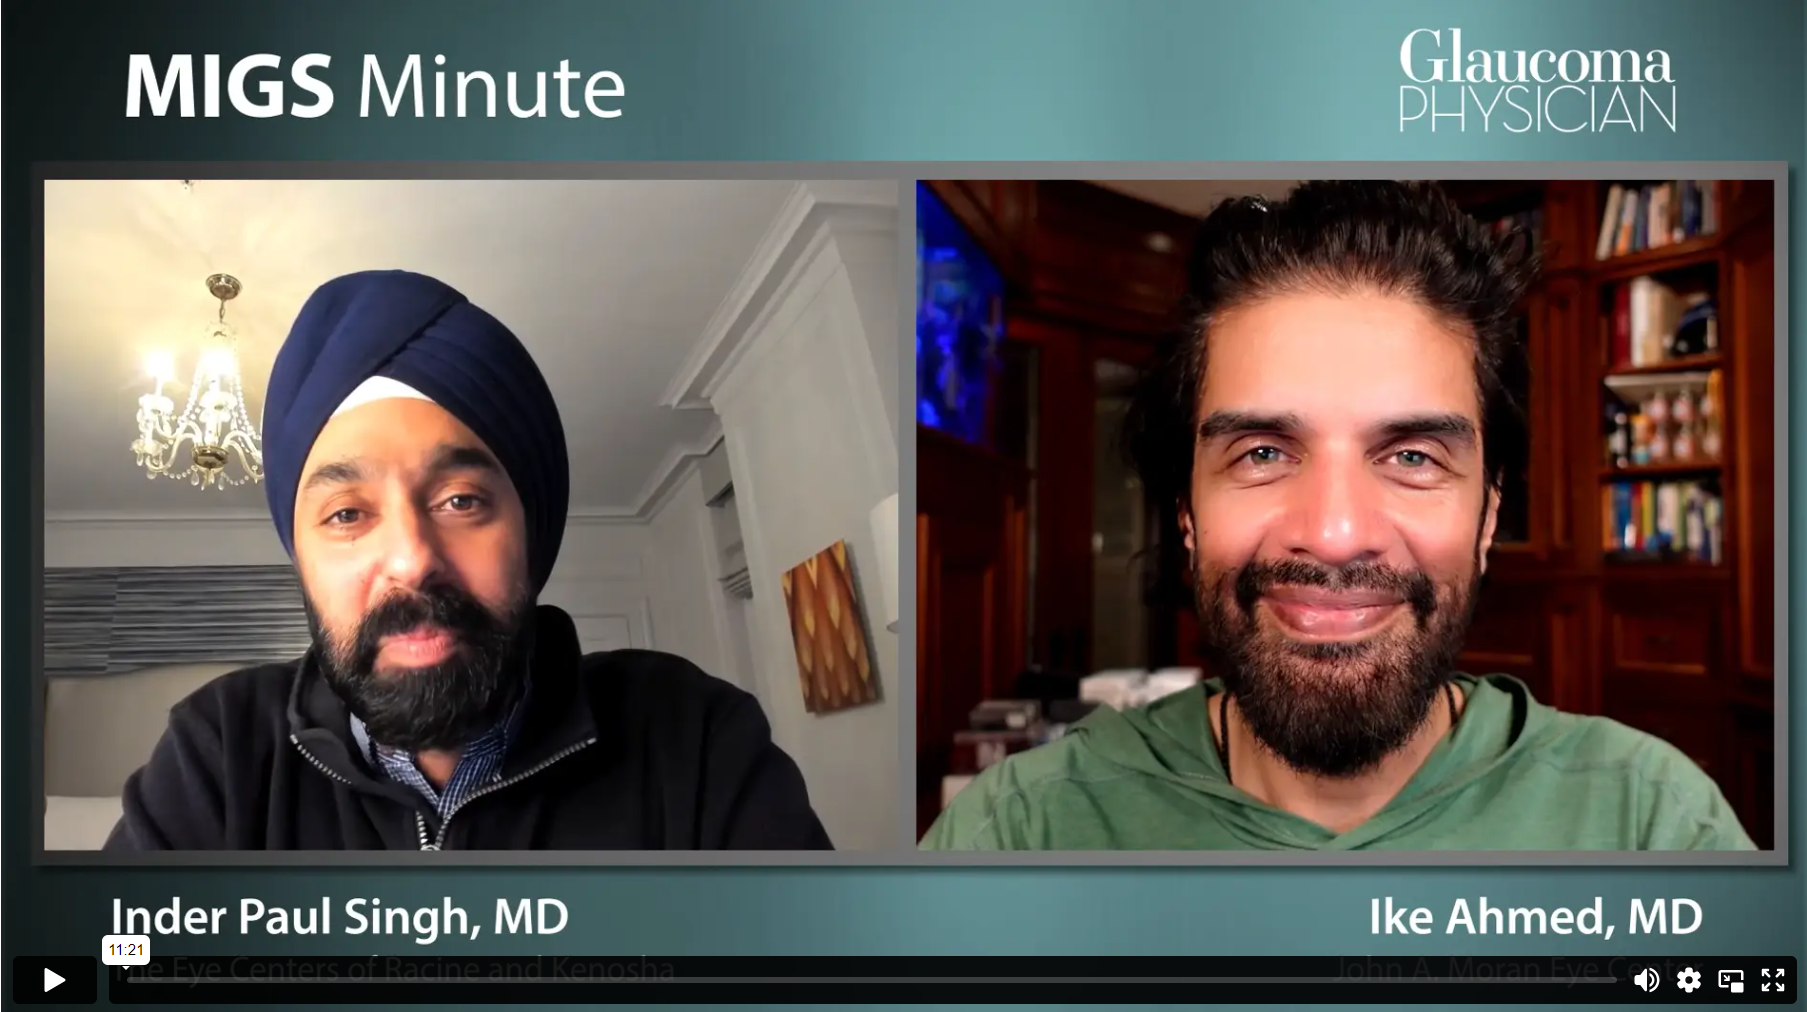 Episode 2: Inder Paul Singh, MD and Ike Ahmed, MD discuss the benefits of adopting an interventional glaucoma mindset.